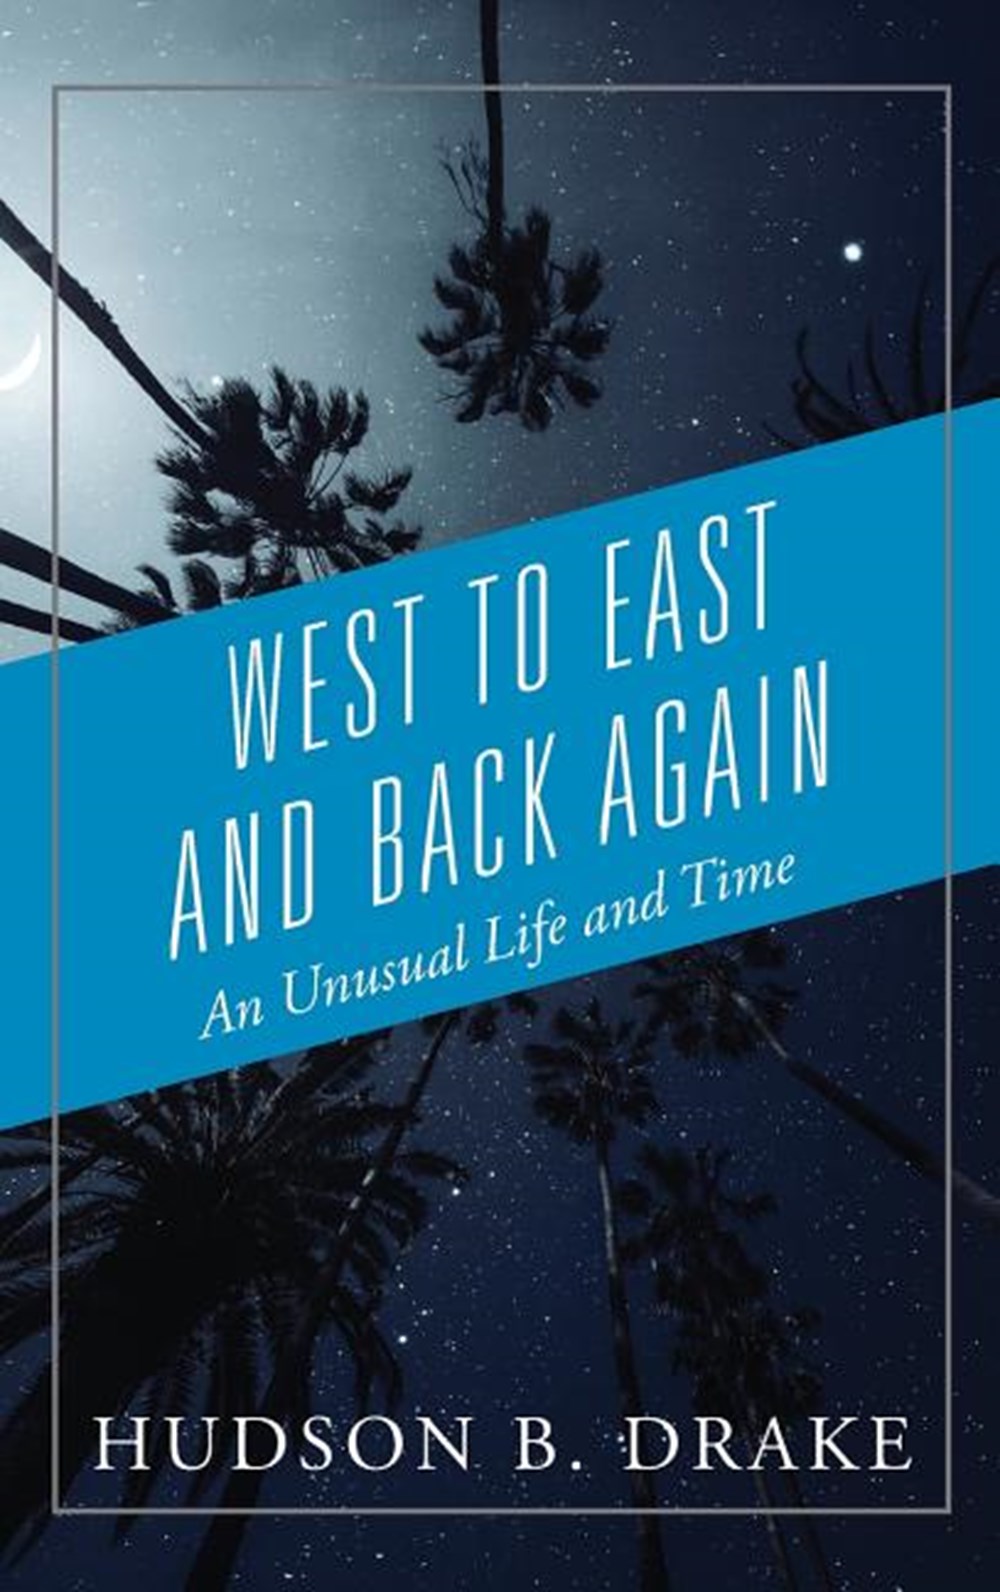 West to East and Back Again An Unusual Life and Time